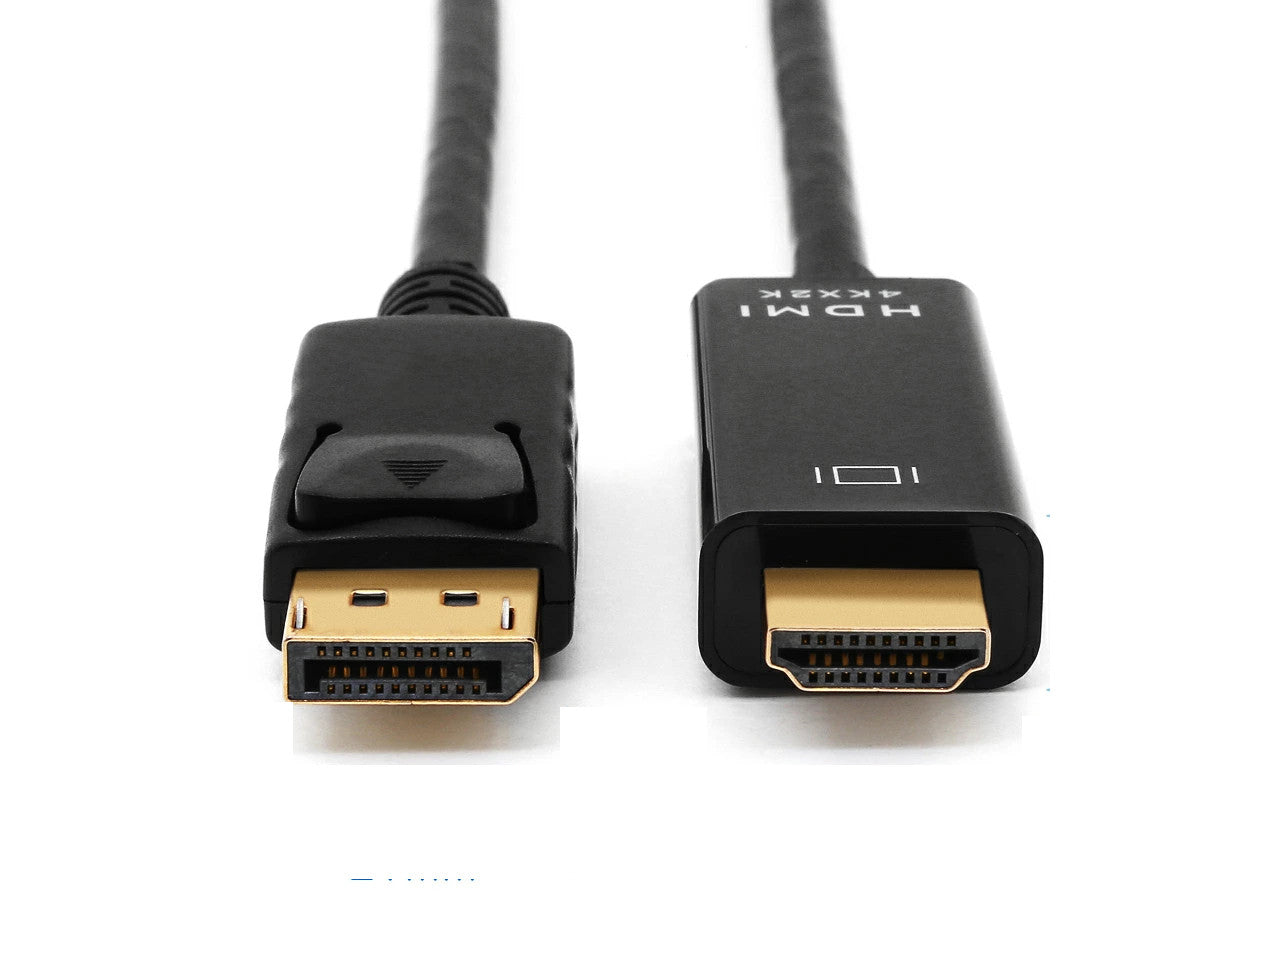 DisplayPort HDMI conversion cable High-definition type 4K compatible D –  mini2x_store(ミニツーストア)